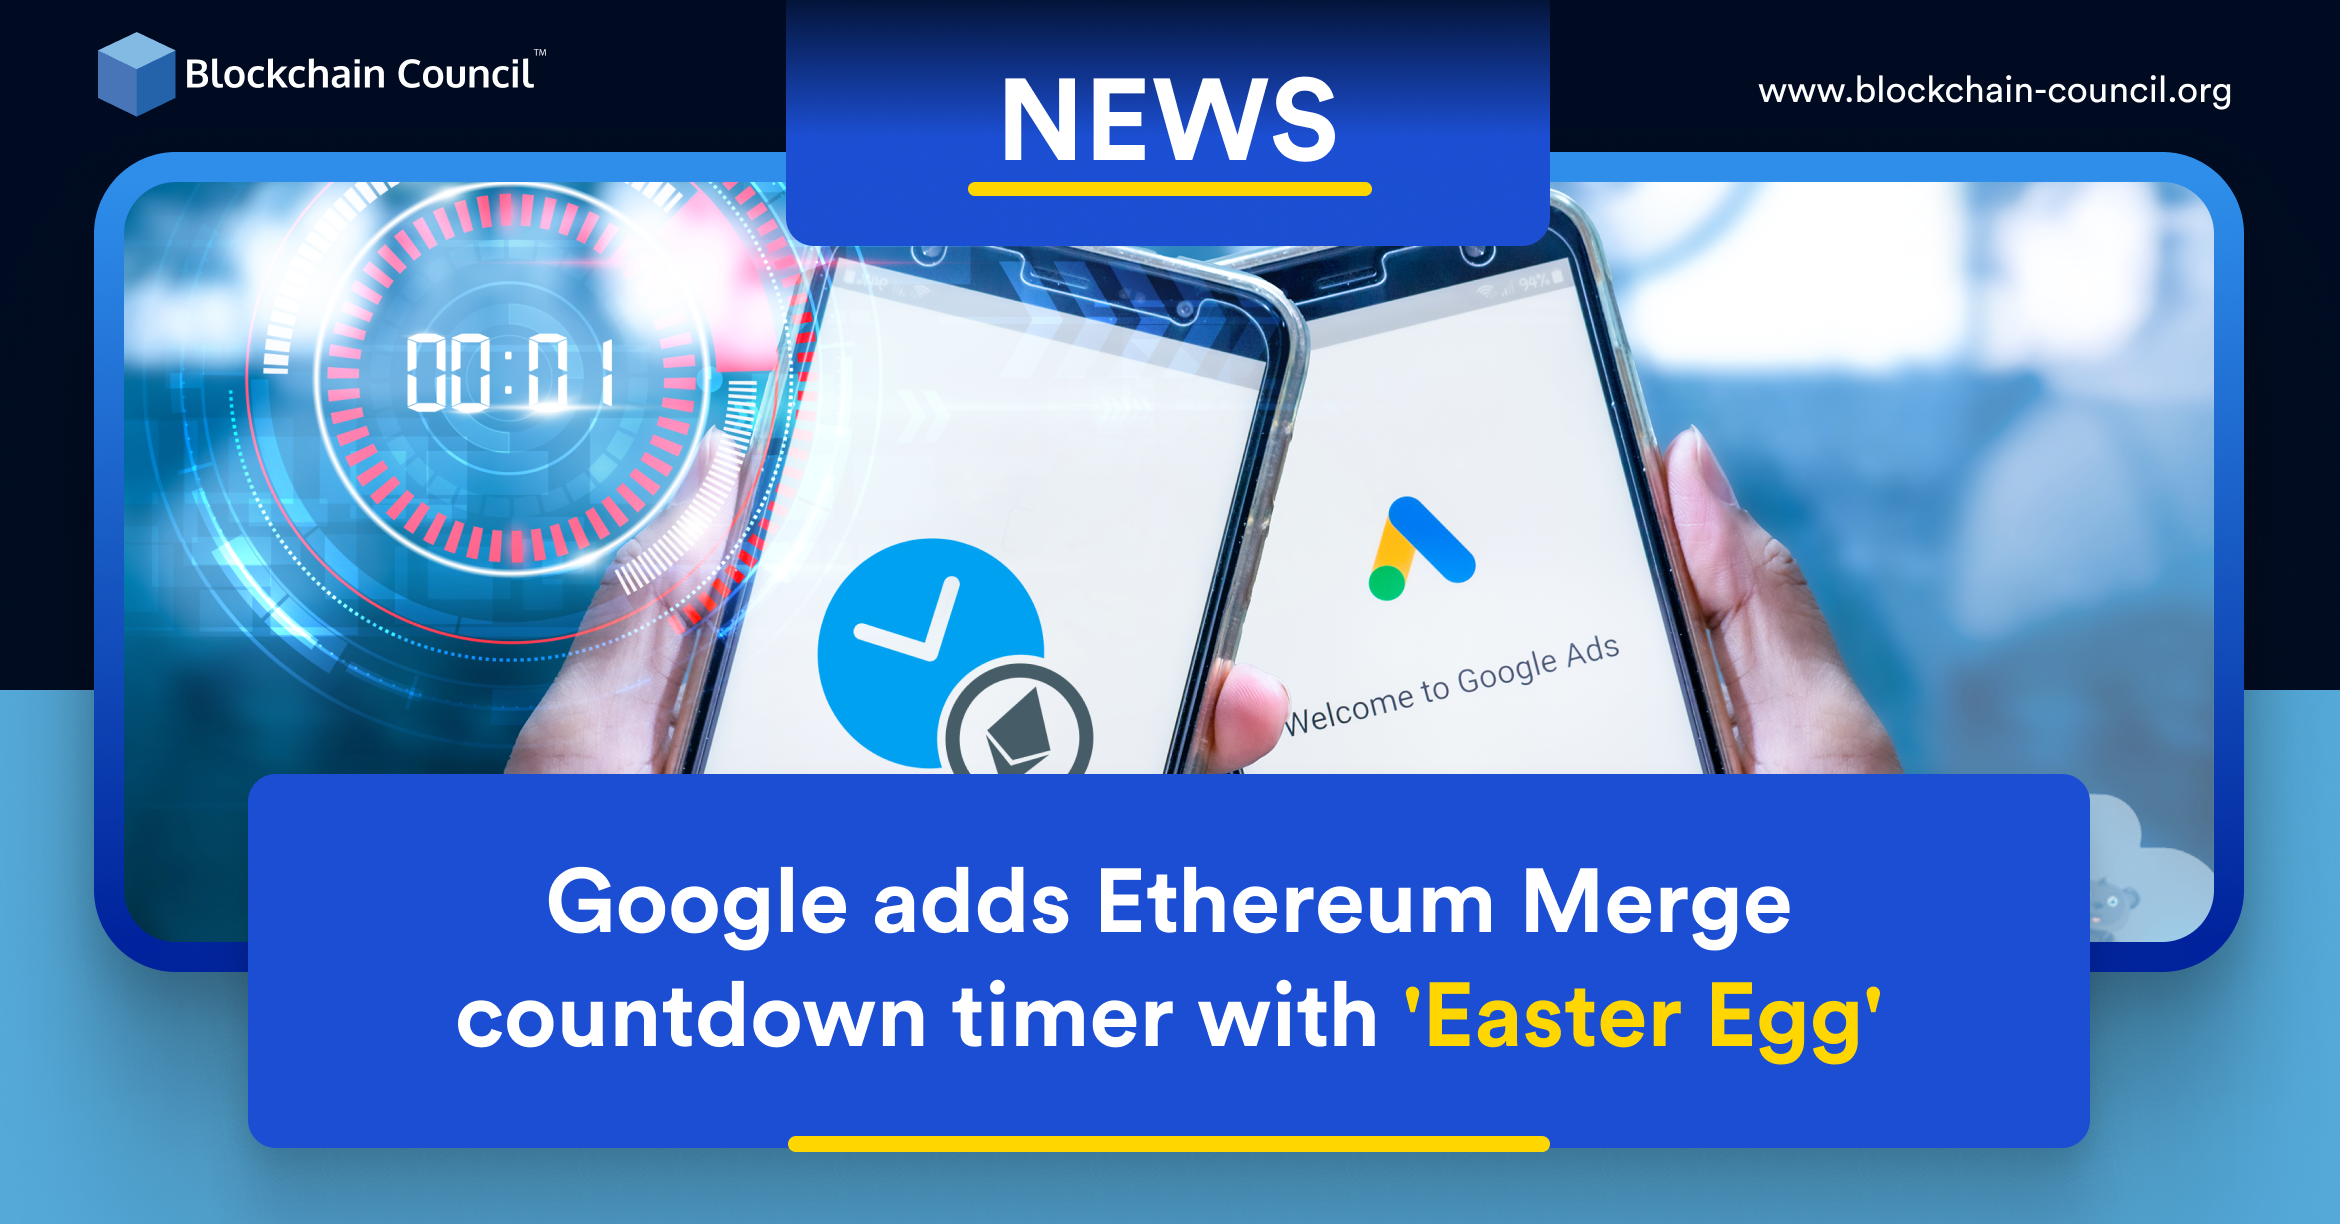 Google adds Ethereum Merge countdown timer with 'Easter Egg'